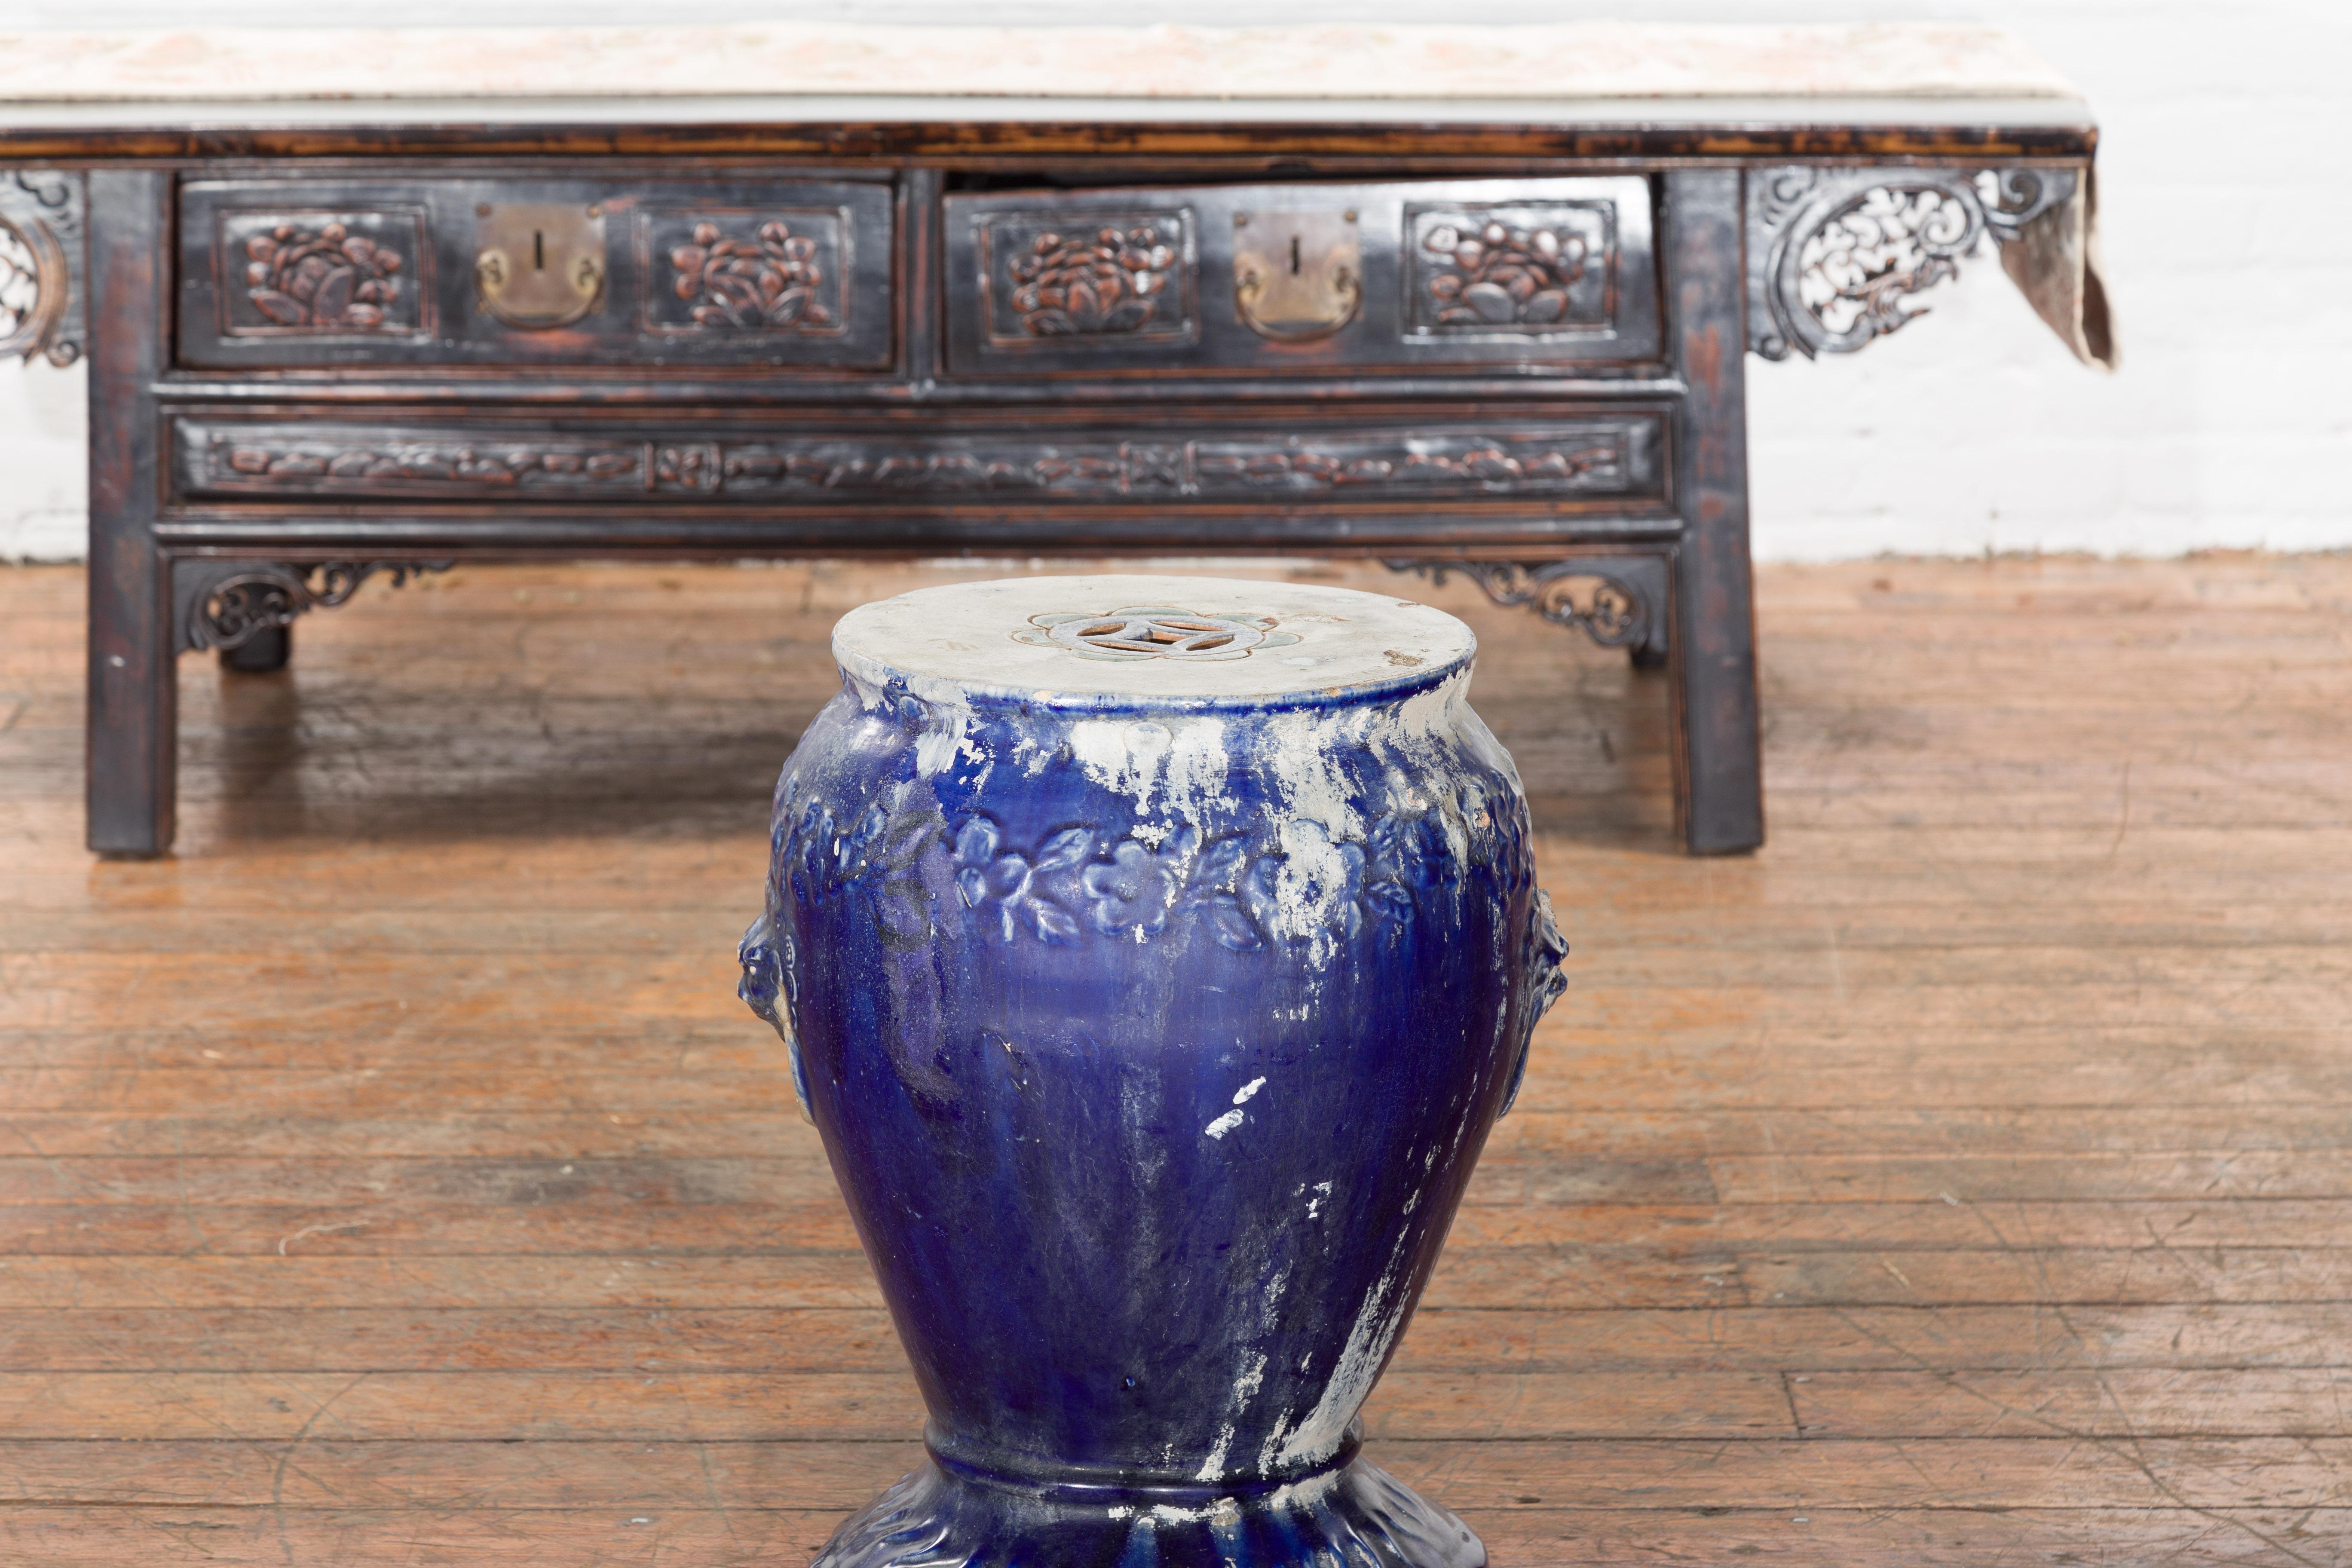 Chinese Qing Dynasty Period Blue Glazed Garden Seat with Floral Motifs on Base For Sale 1